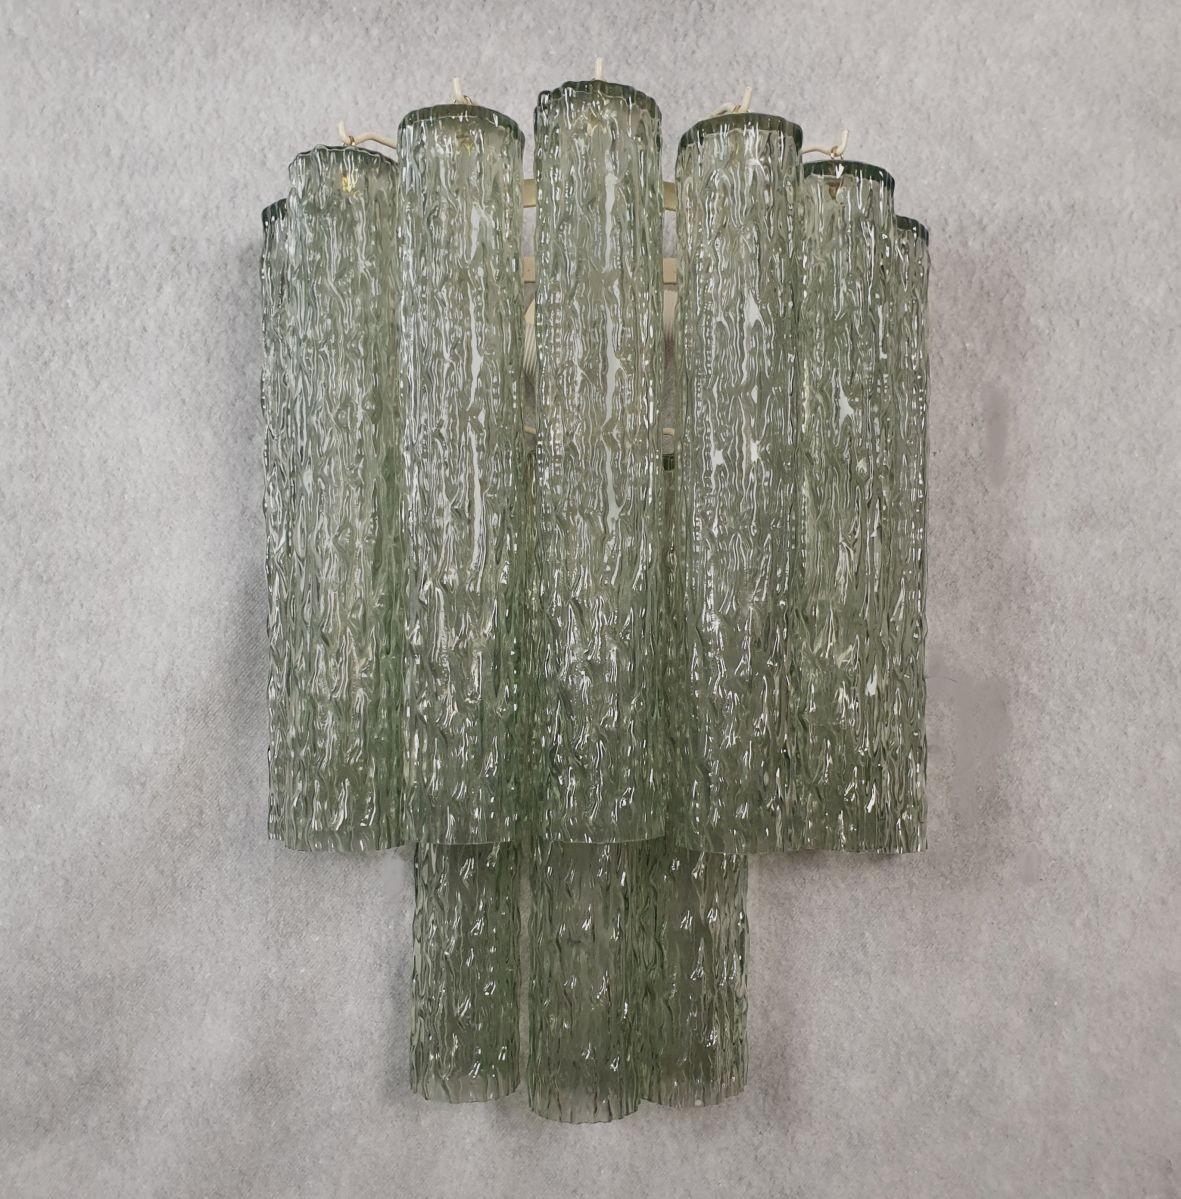 Pair of large Murano glass sconces, Mid century modern. Attributed to Mazzega, Italy 1970s.
The sconces are made of olive green Murano glass tubes, on two tiers.
The tubes are veined, textured outside.
The frame is painted ivory.
Each sconce has 3